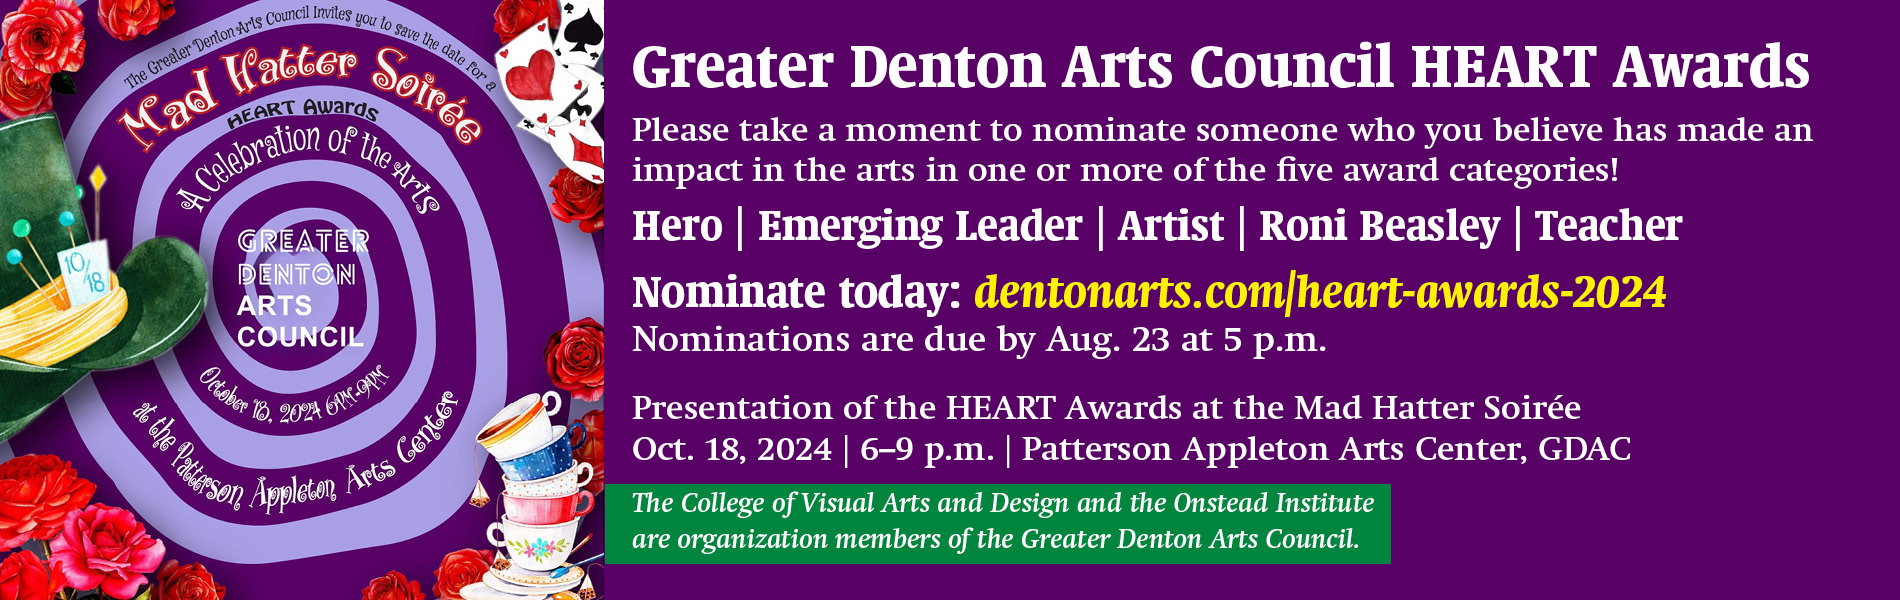 GDAC HEART Awards 2024, nominations are due Aug. 23 by 5 p.m.